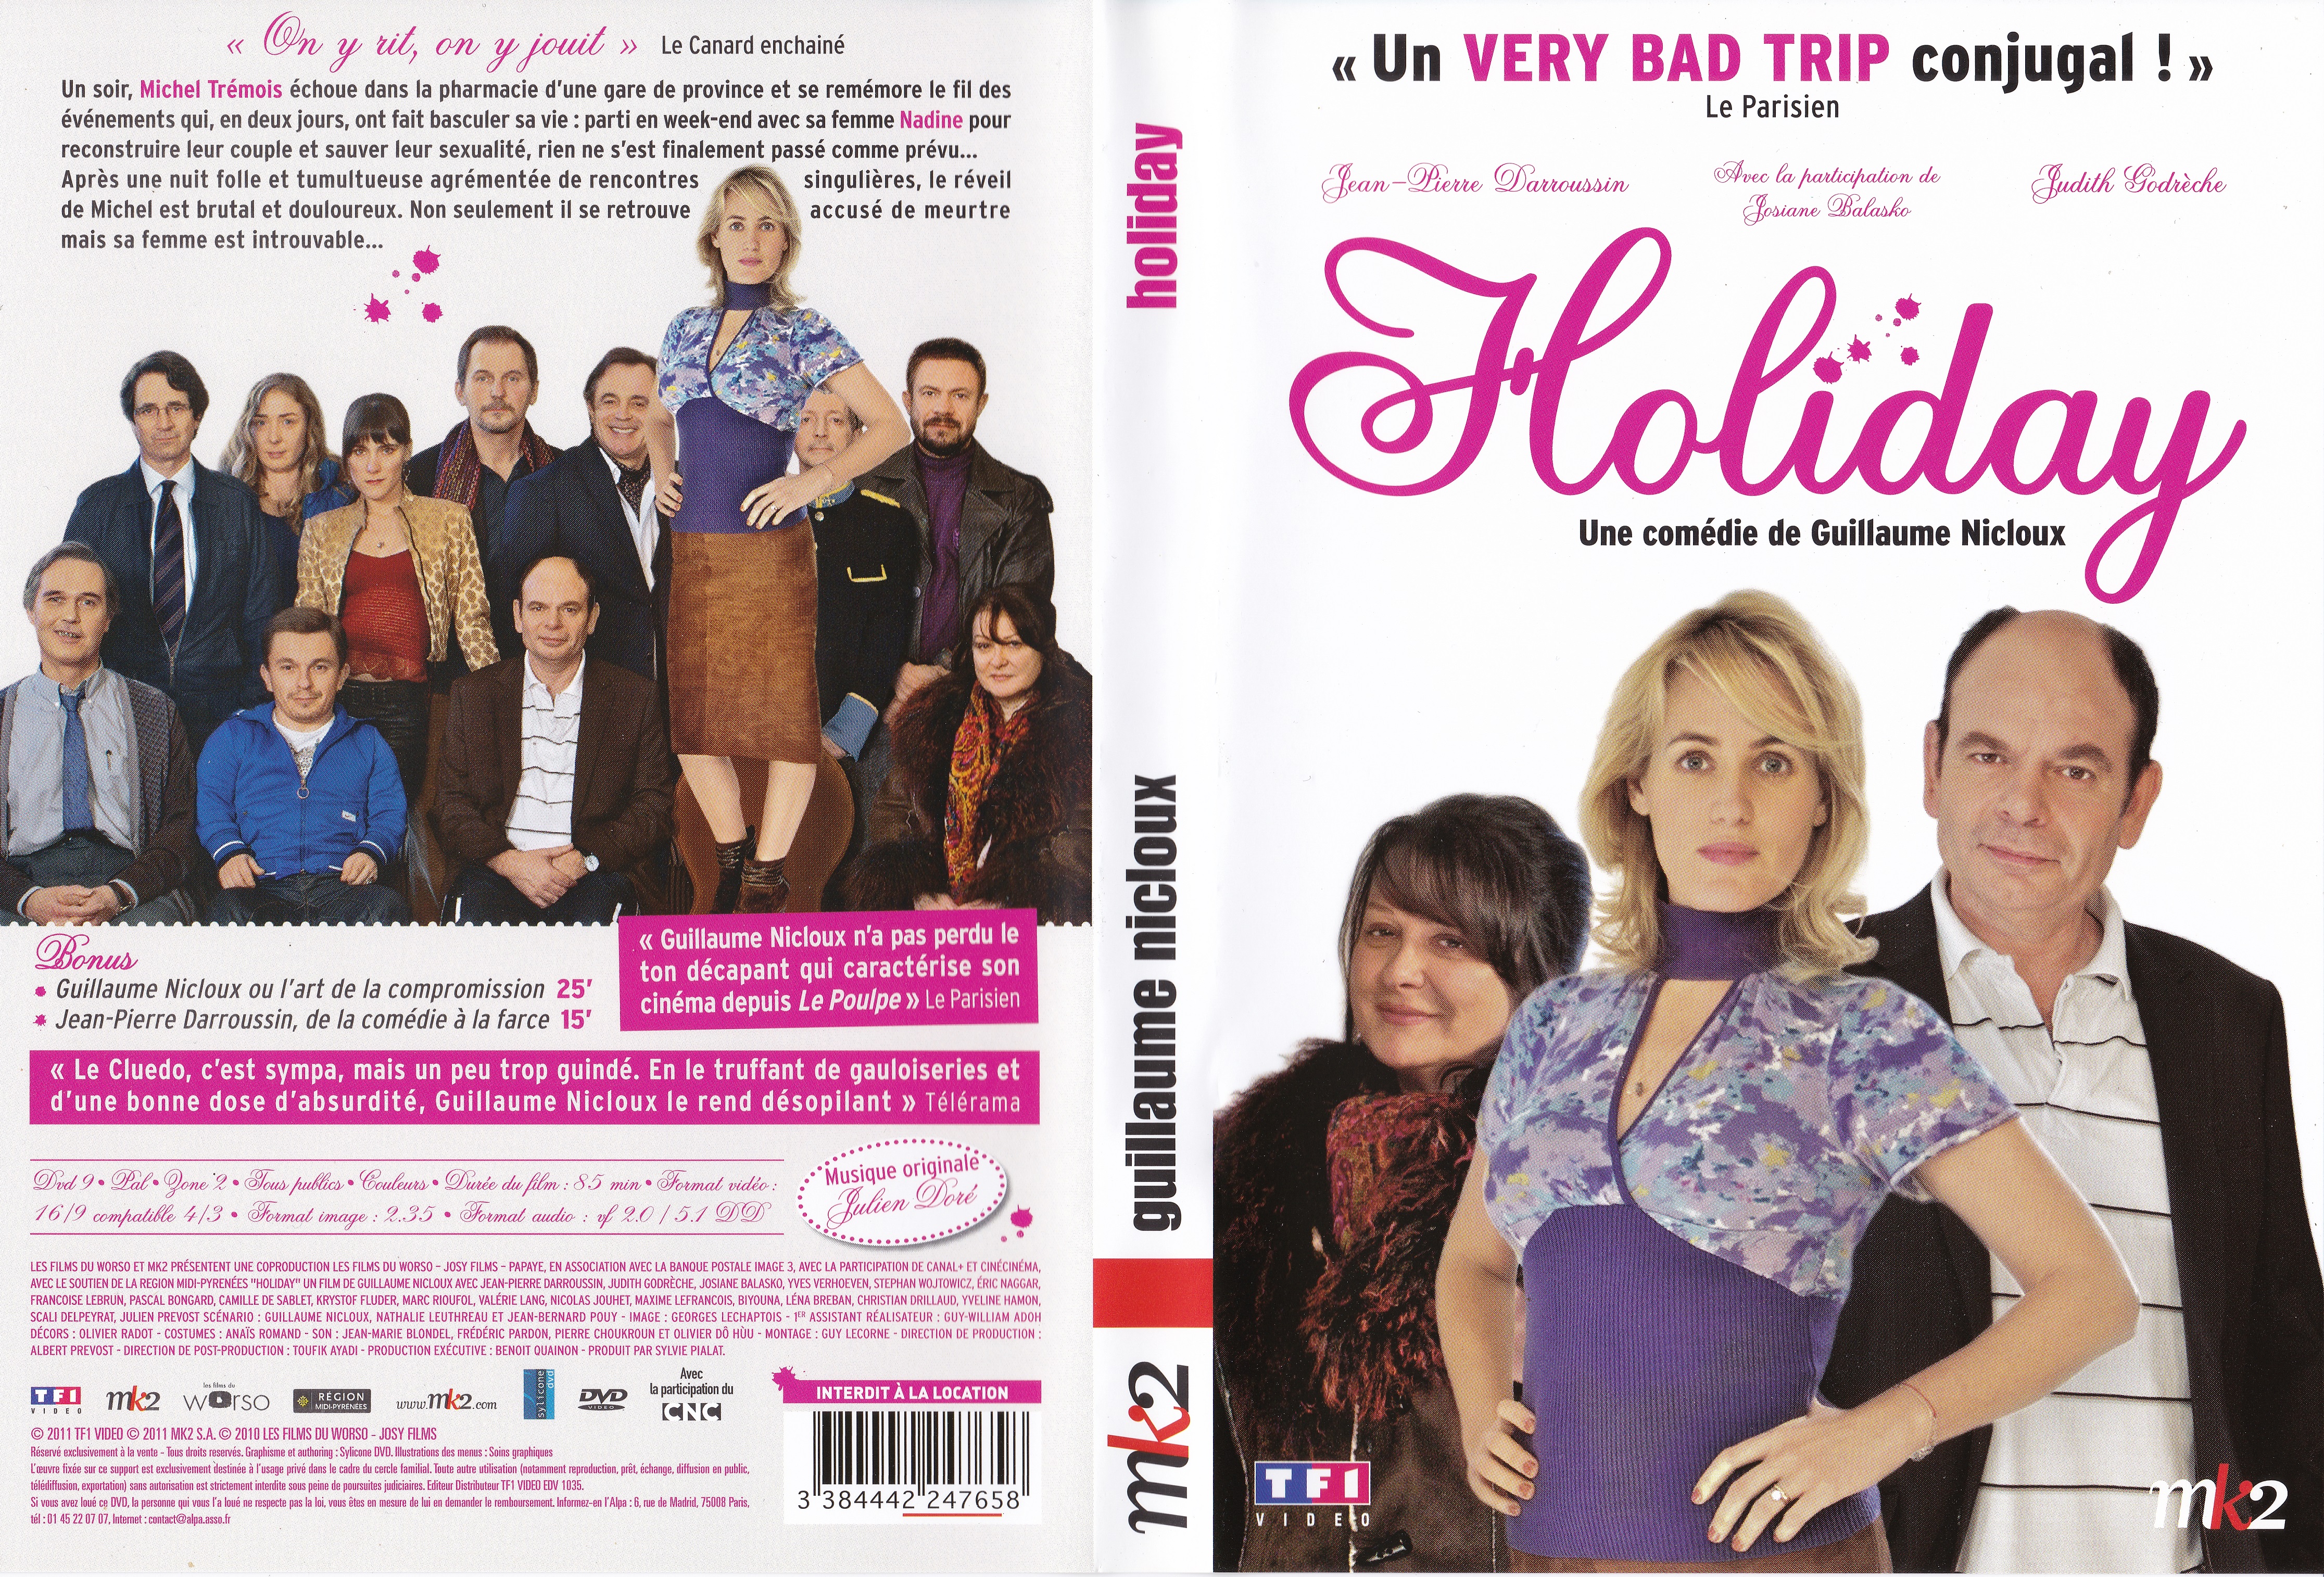 Jaquette DVD Holiday